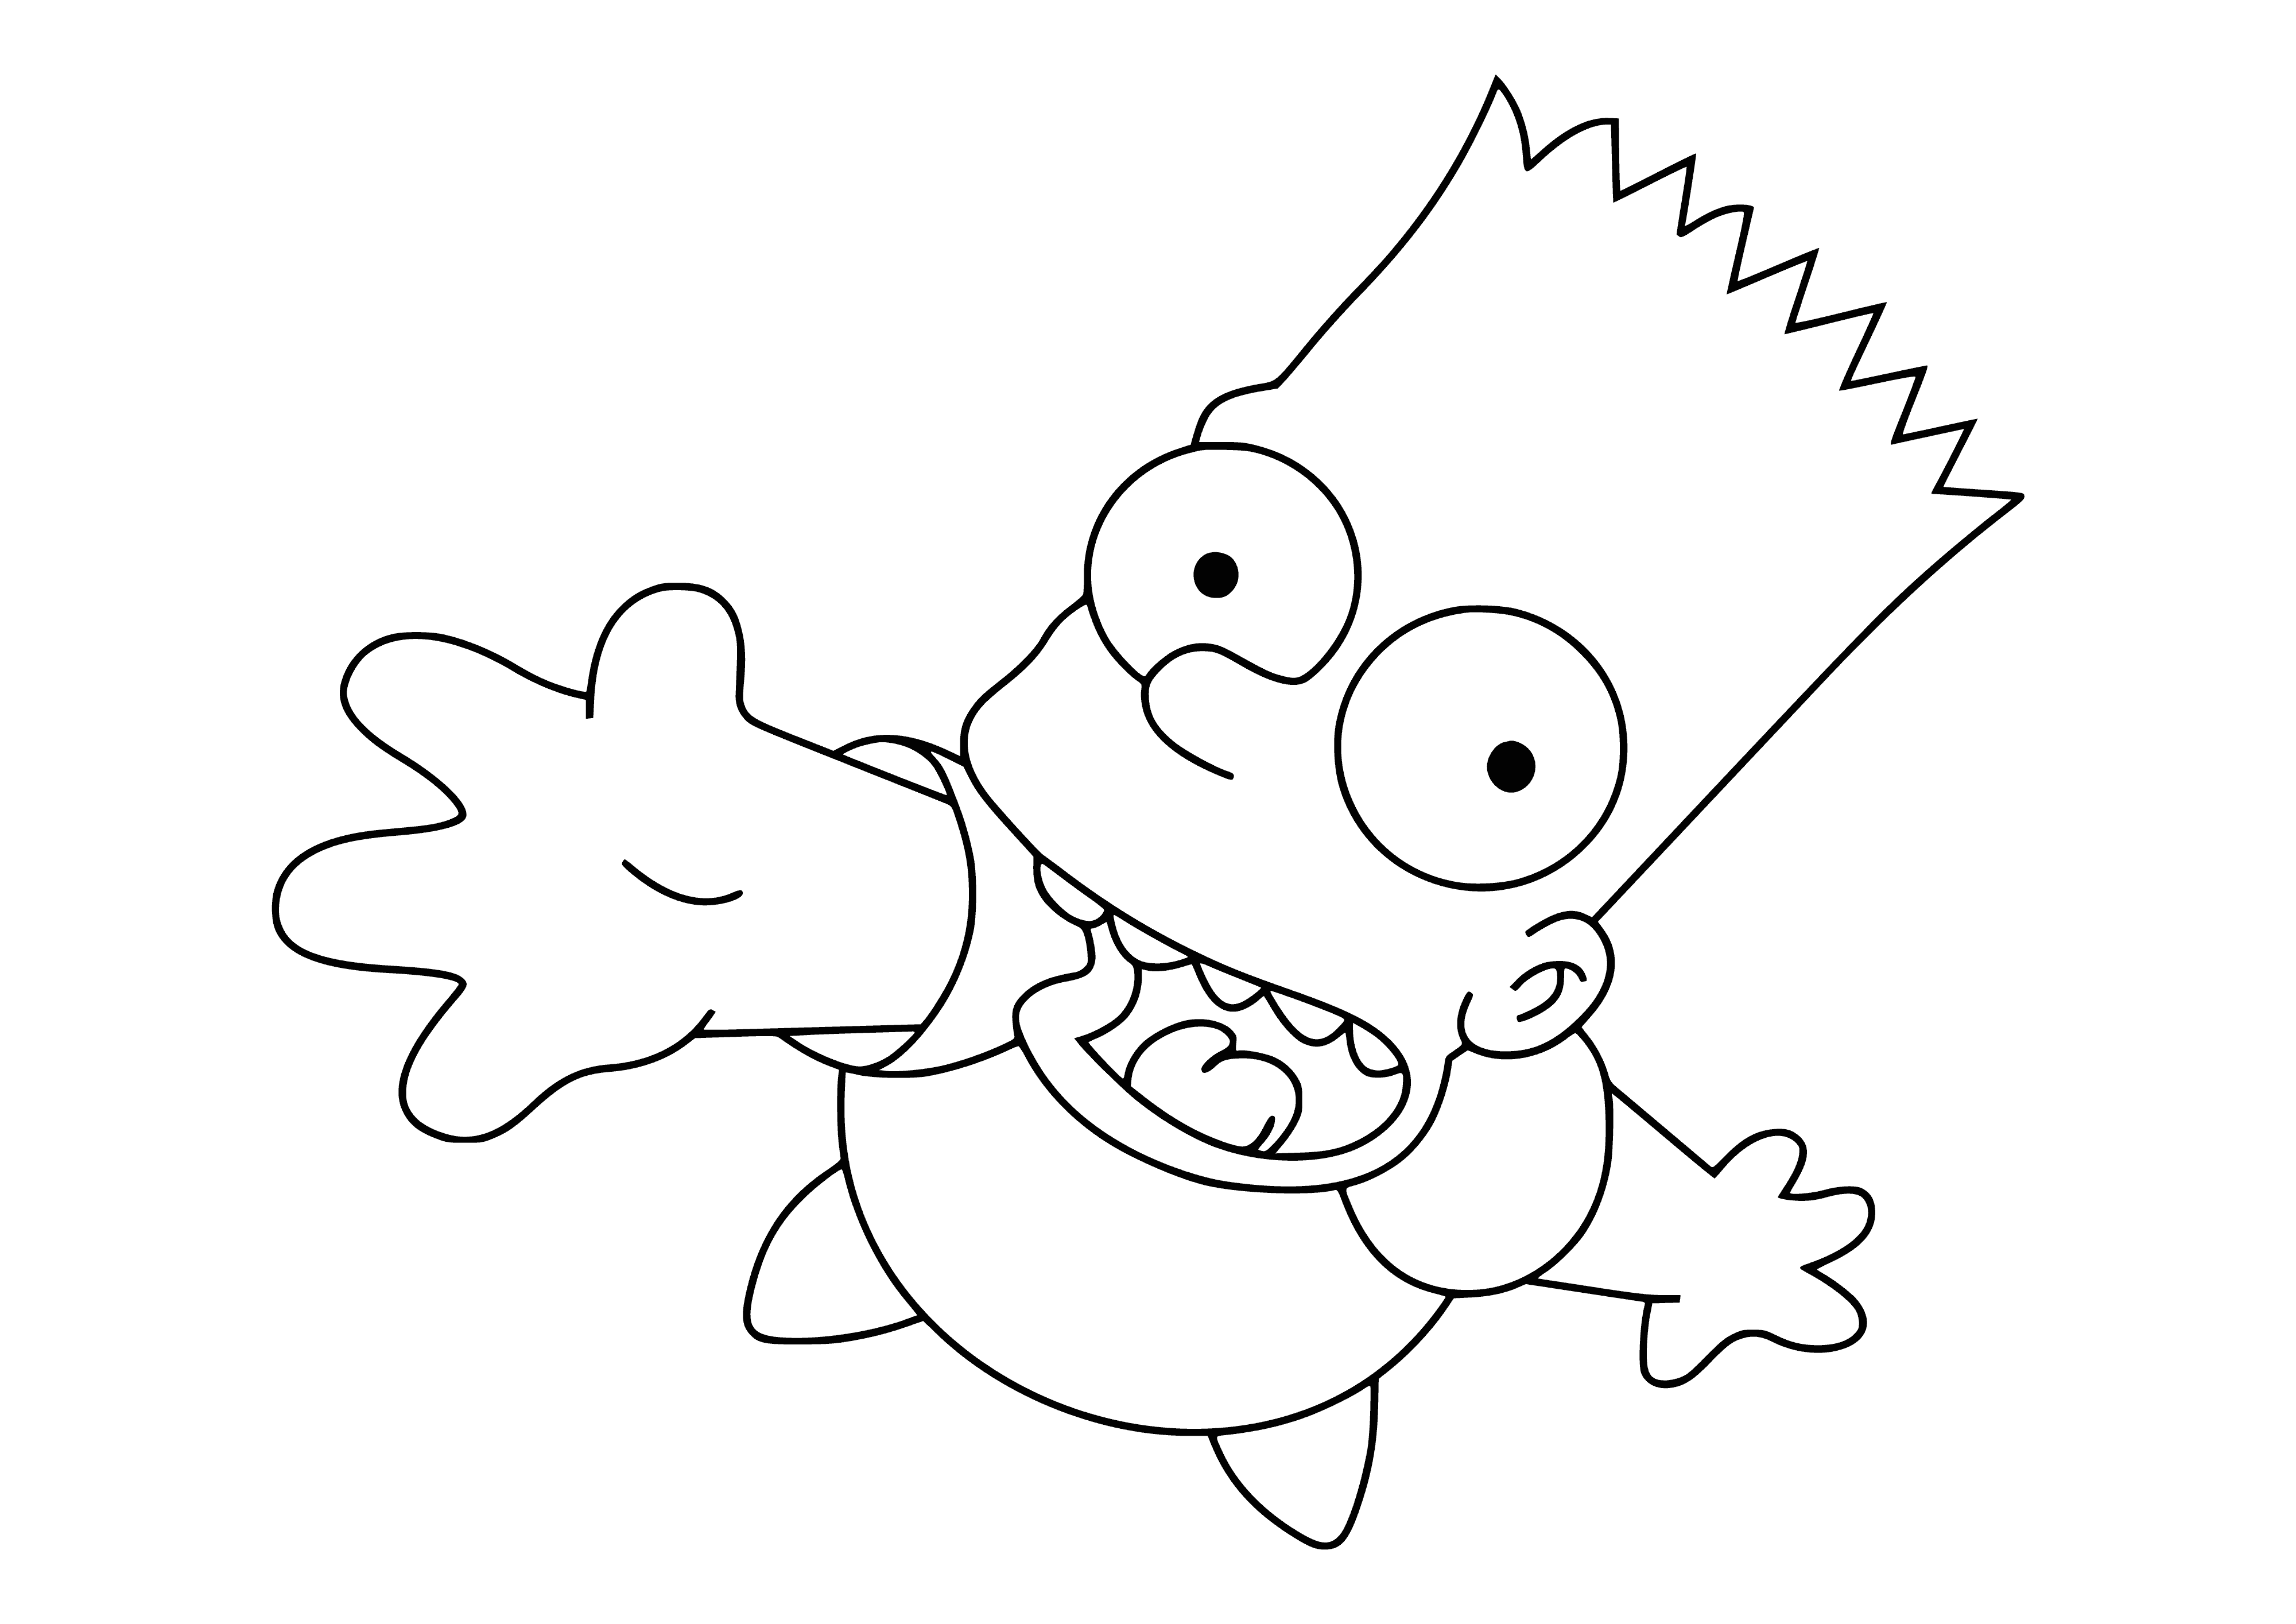 coloring page: Bart Simpson is up to mischief, wearing his signature yellow hair, blue shorts and red shirt, with arms crossed in front of a chalkboard.